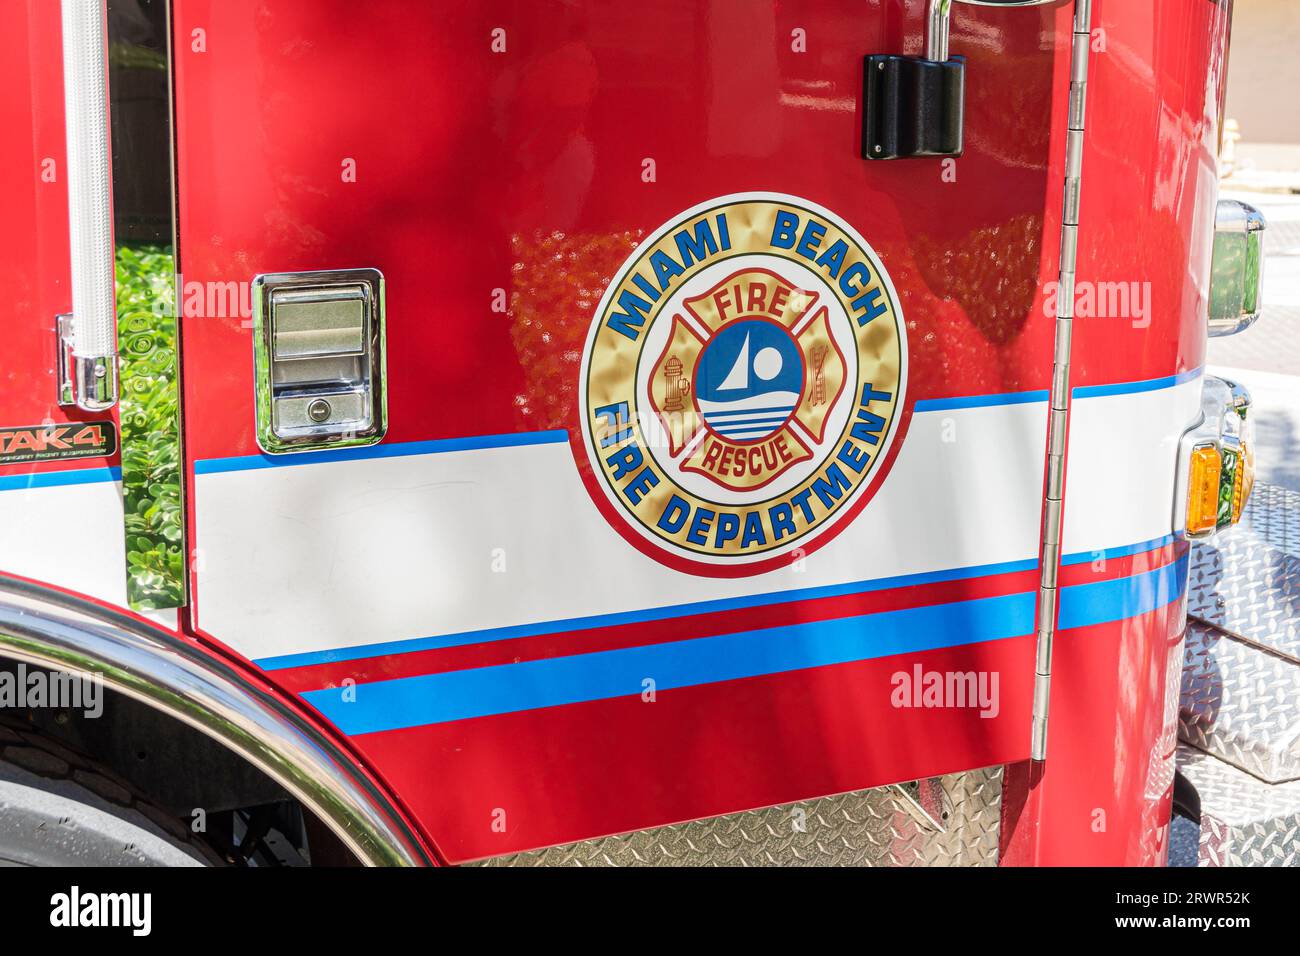 Miami Beach Florida,class 1 fire department engine truck red,seal Stock Photo